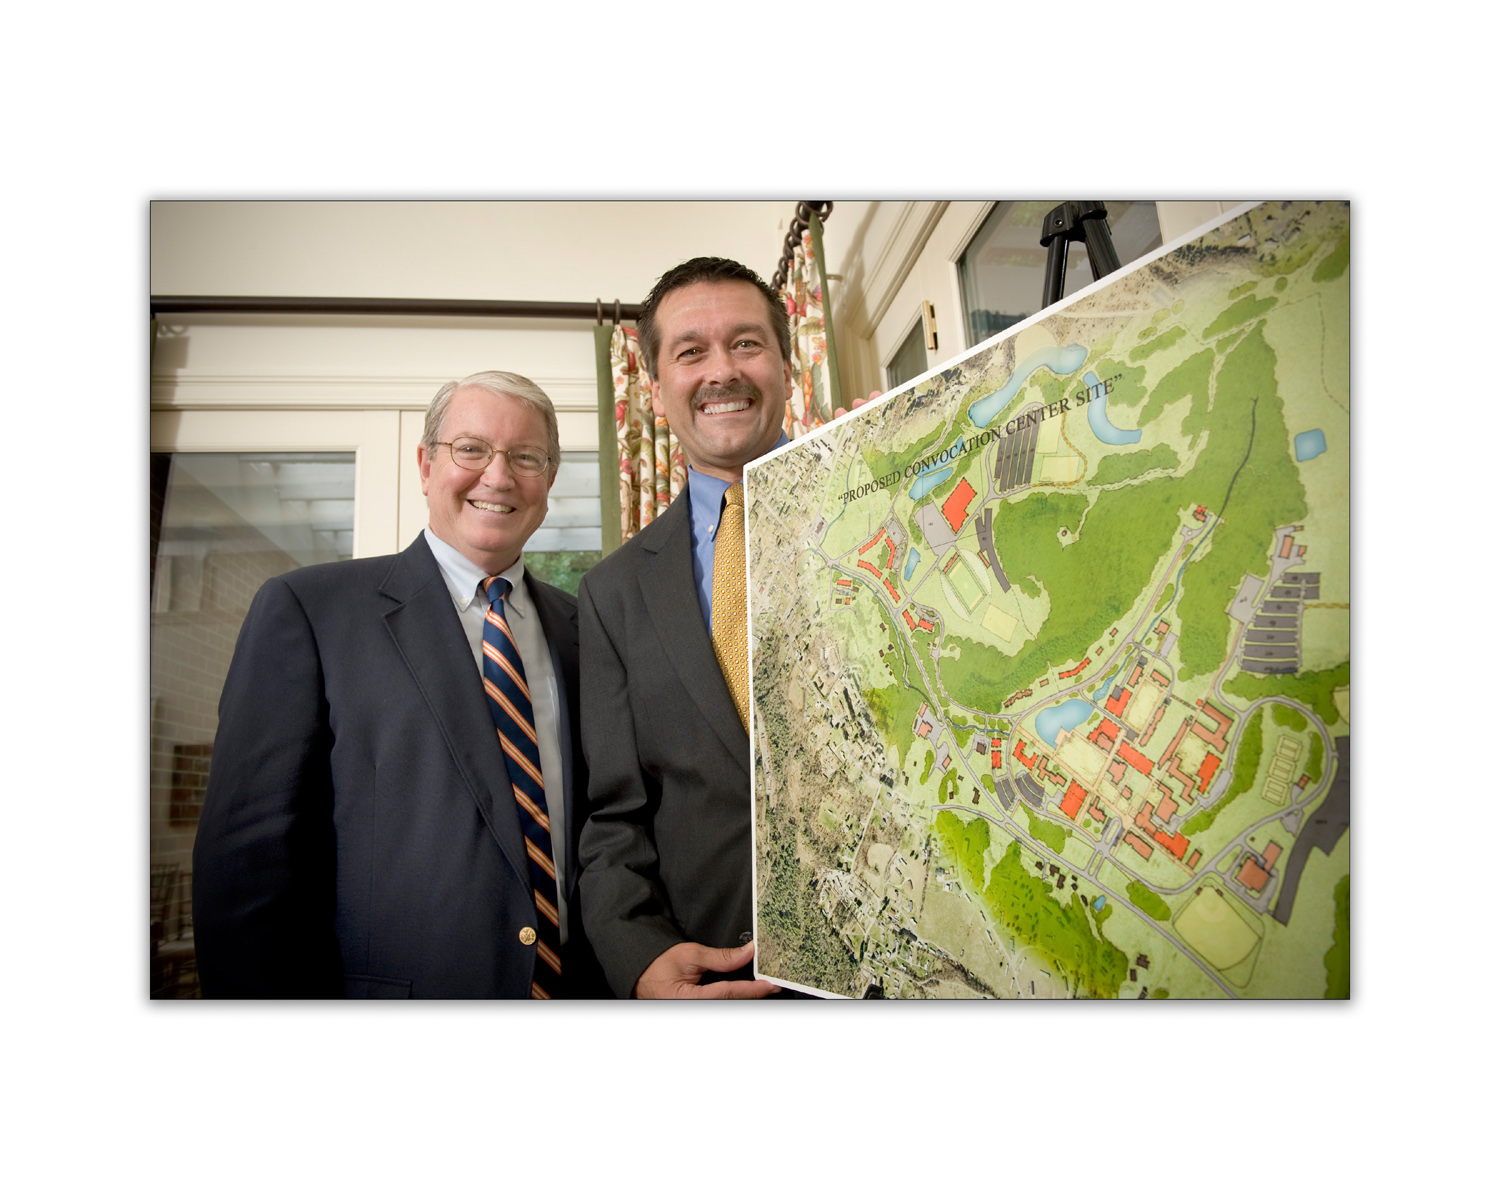 David J. Prior and Terry Kilgore hold a map of future expansions at UVA